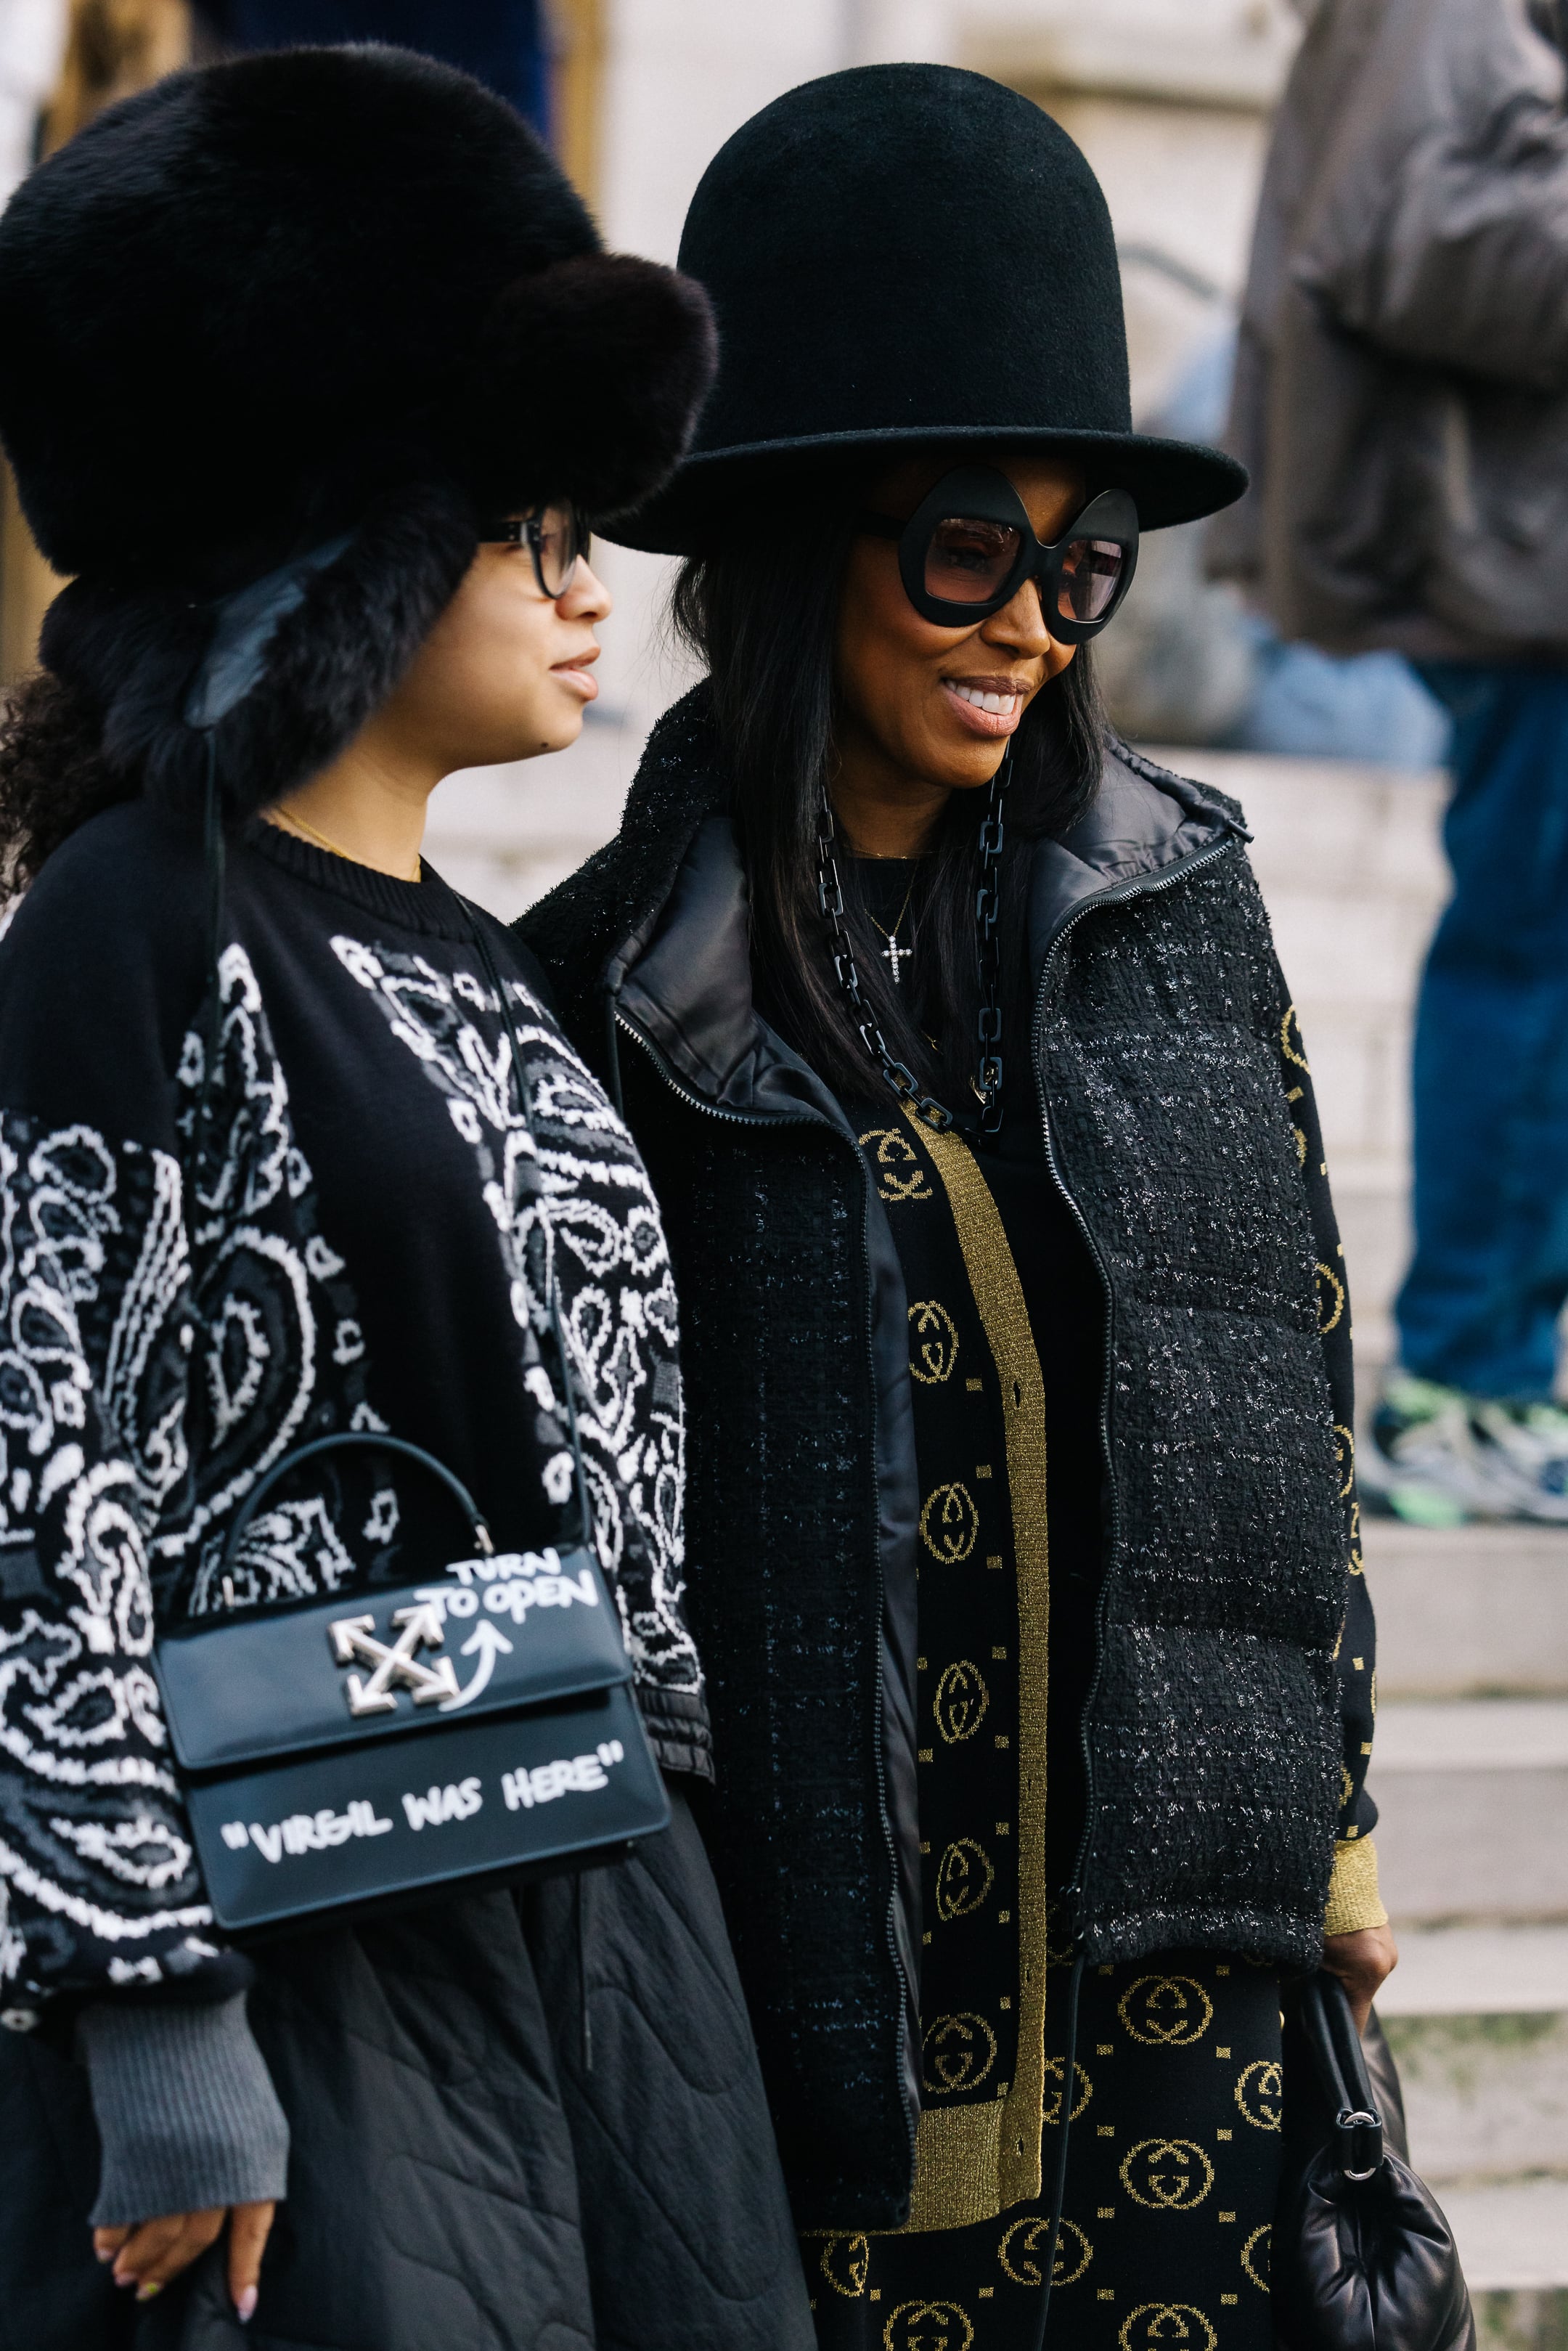 The 15 Best Chanel Outfits, From the Runway to Street Style